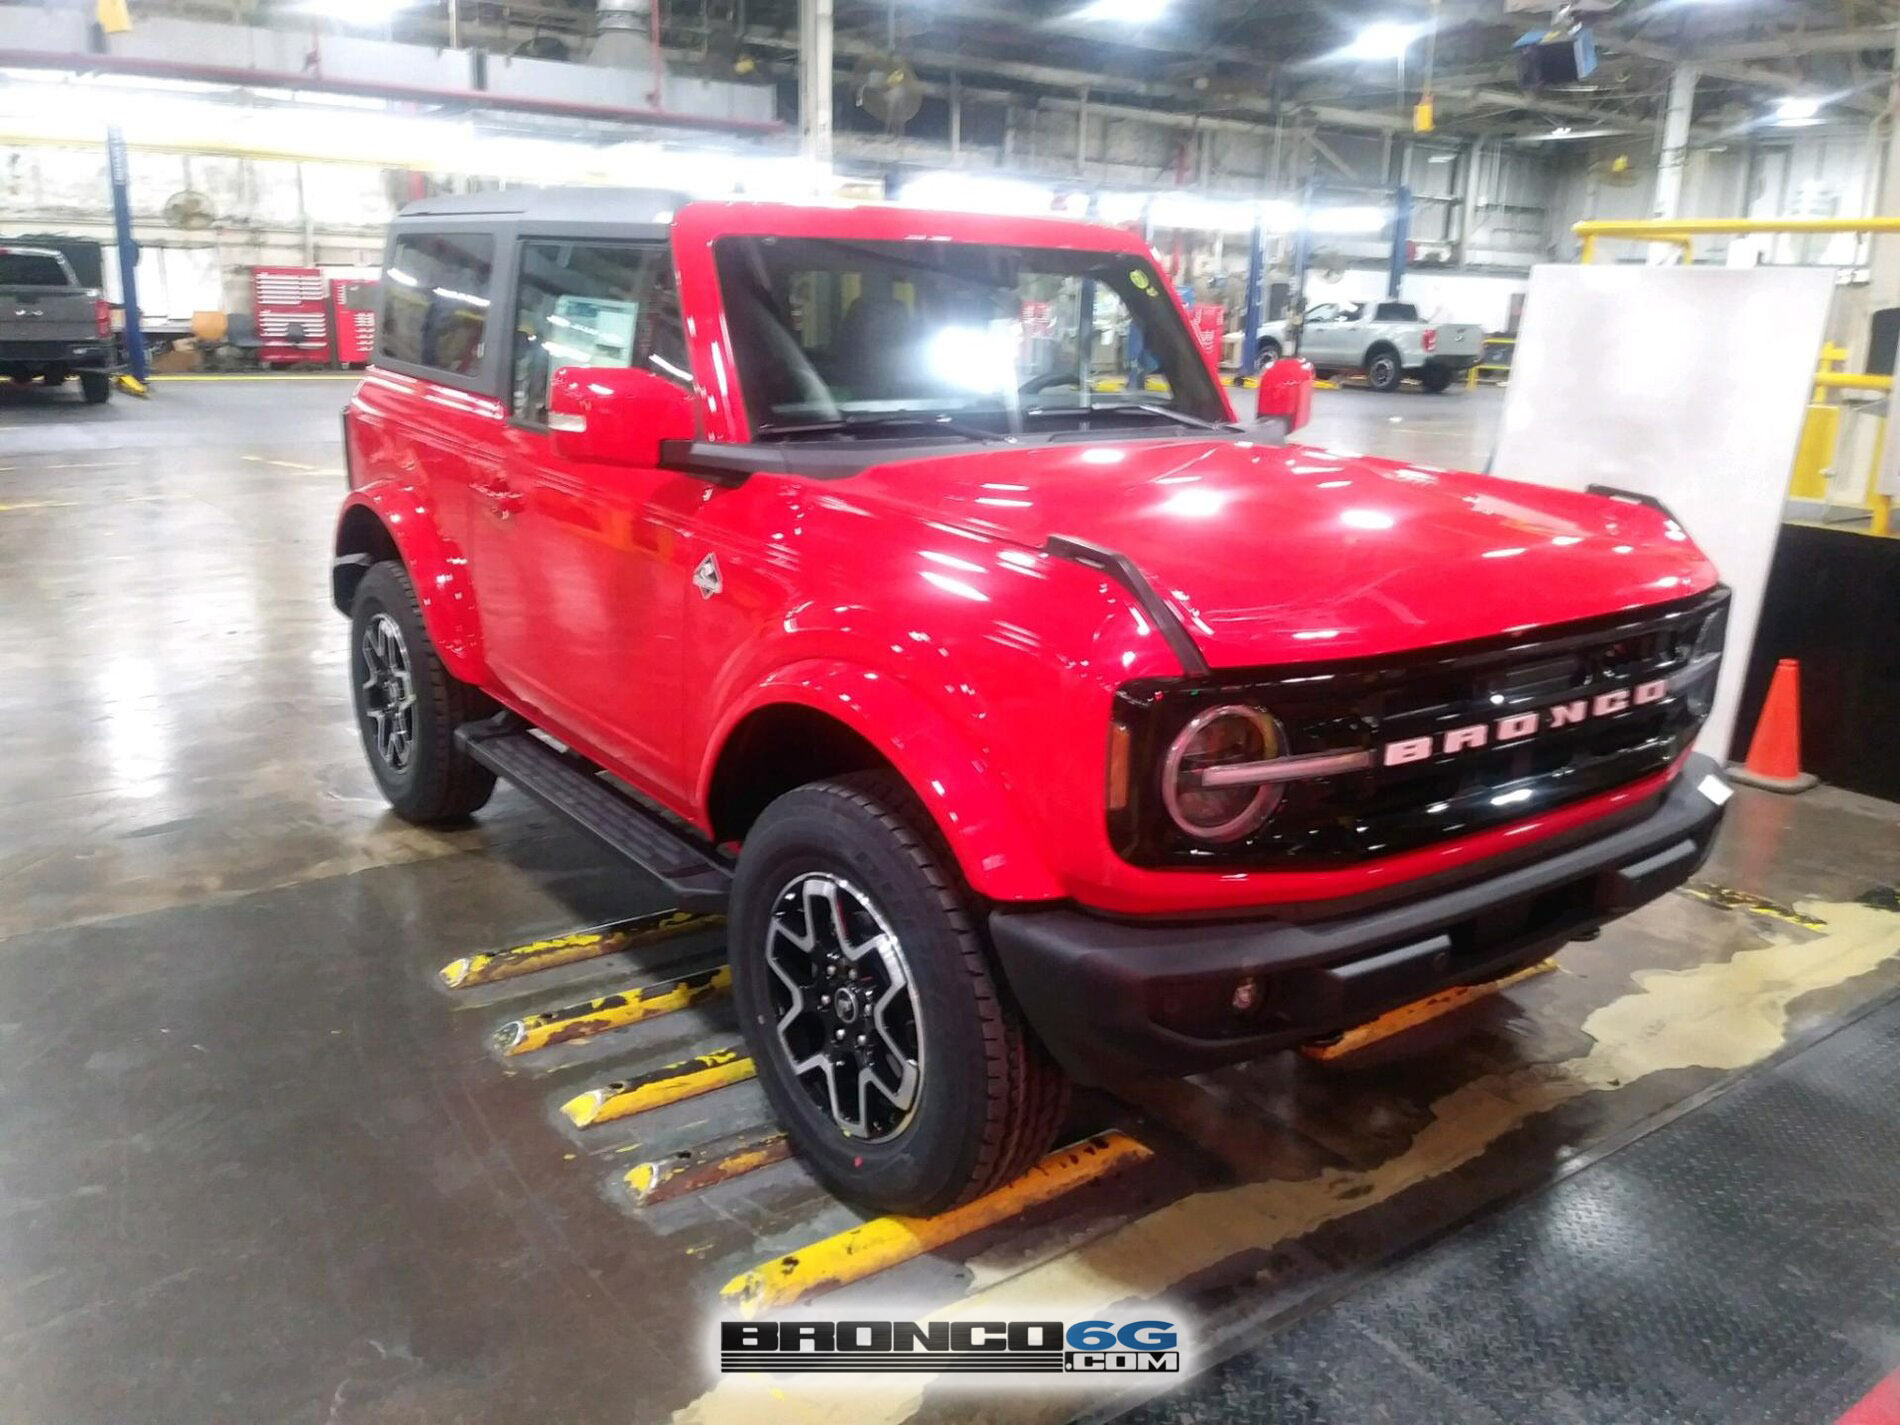 2021 Bronco Outer Banks Leather interior factory production line photos 32 Race Red.jpg